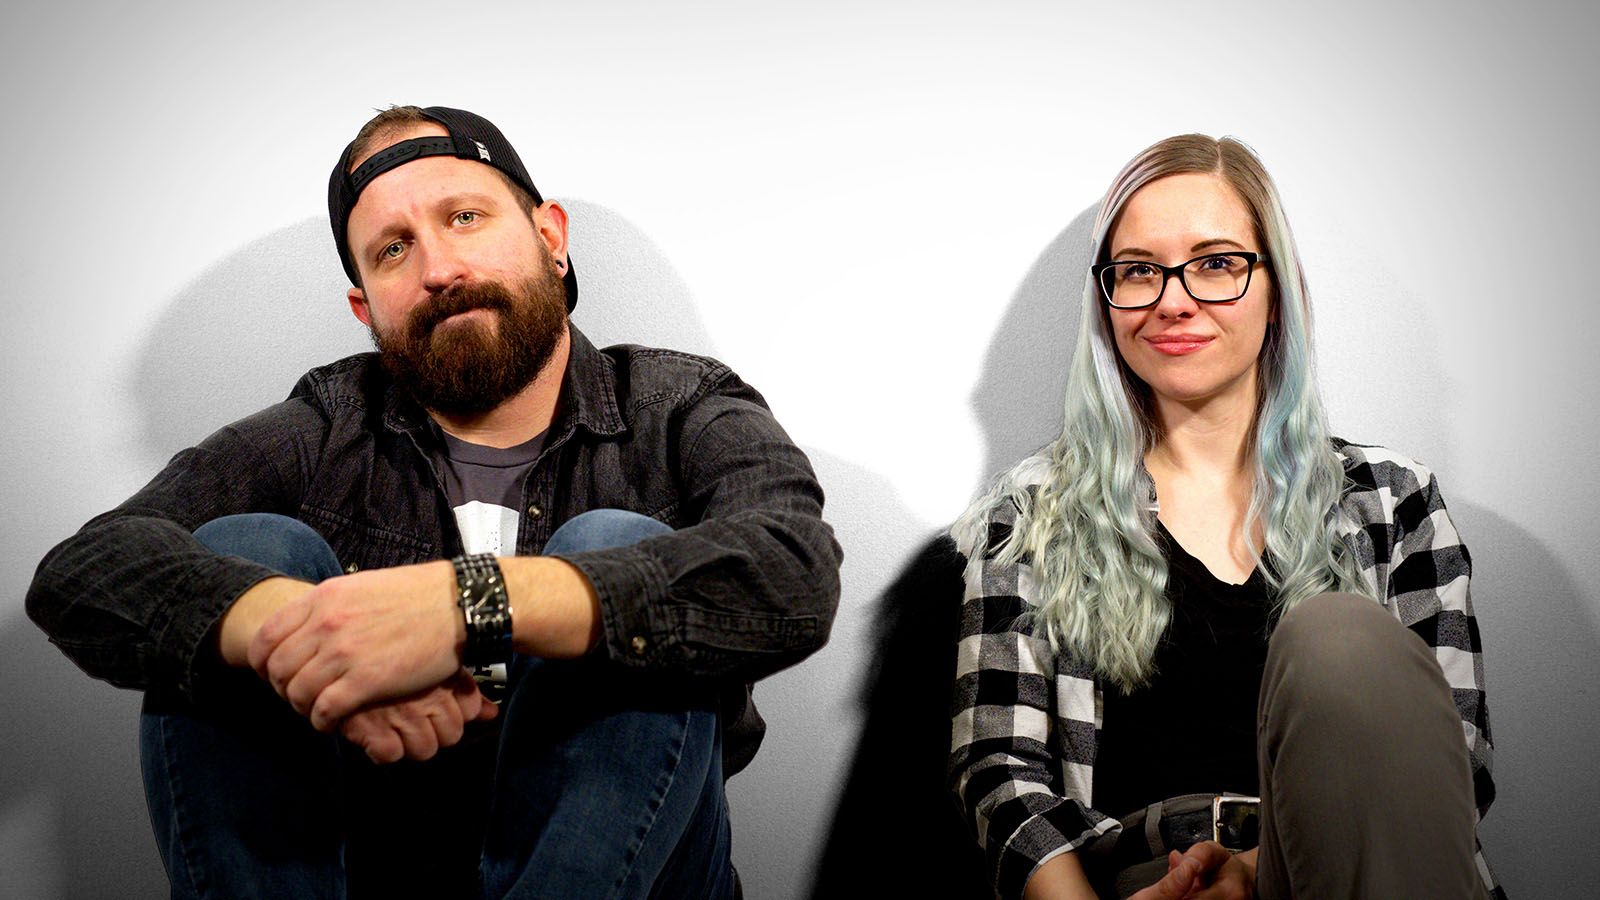 Sweetwater Sound employees Bobby Dellarocco and Krystal Davis came together to record an EP, Epiphany, which has earned them a spot in the ALT Homegrown Spotlight.